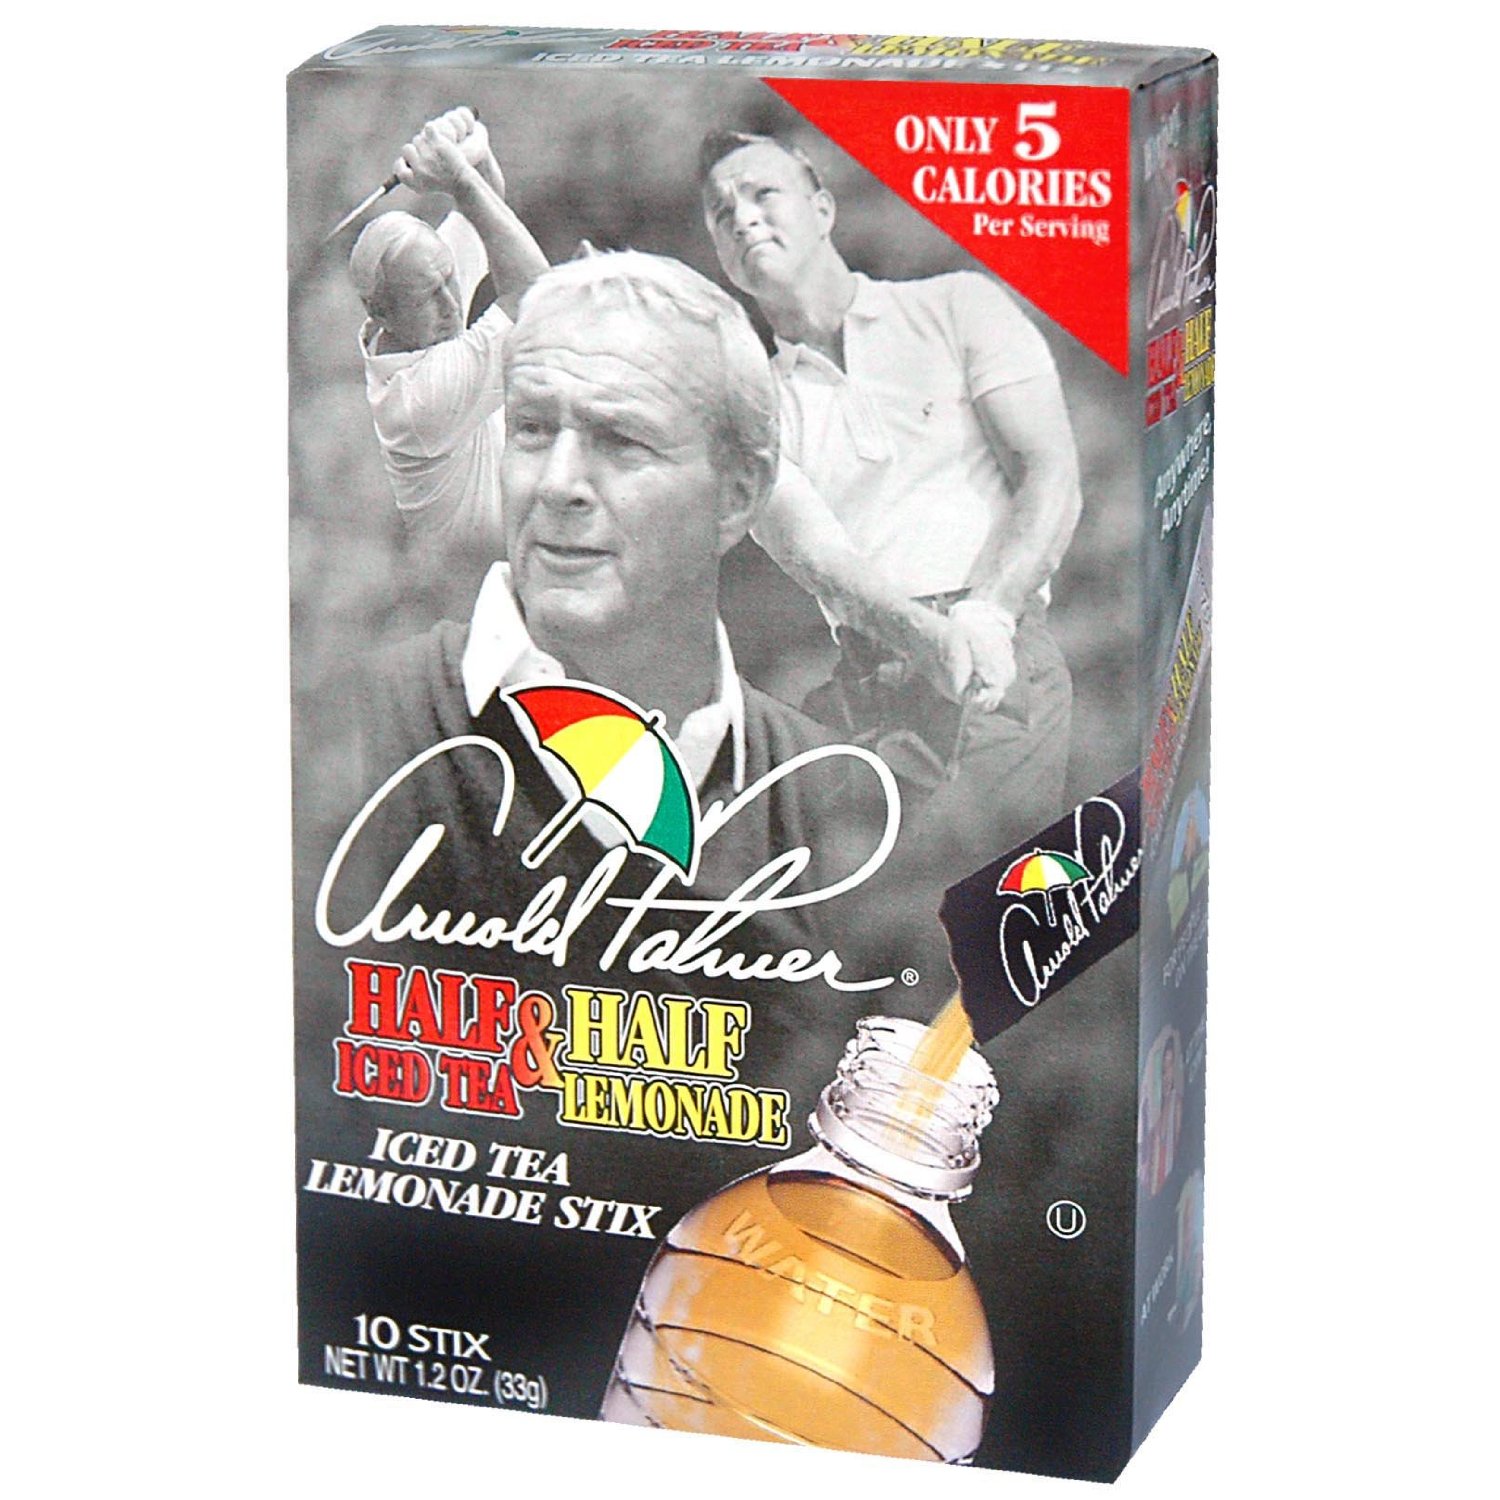 Download this Arizona Arnold Palmer... picture